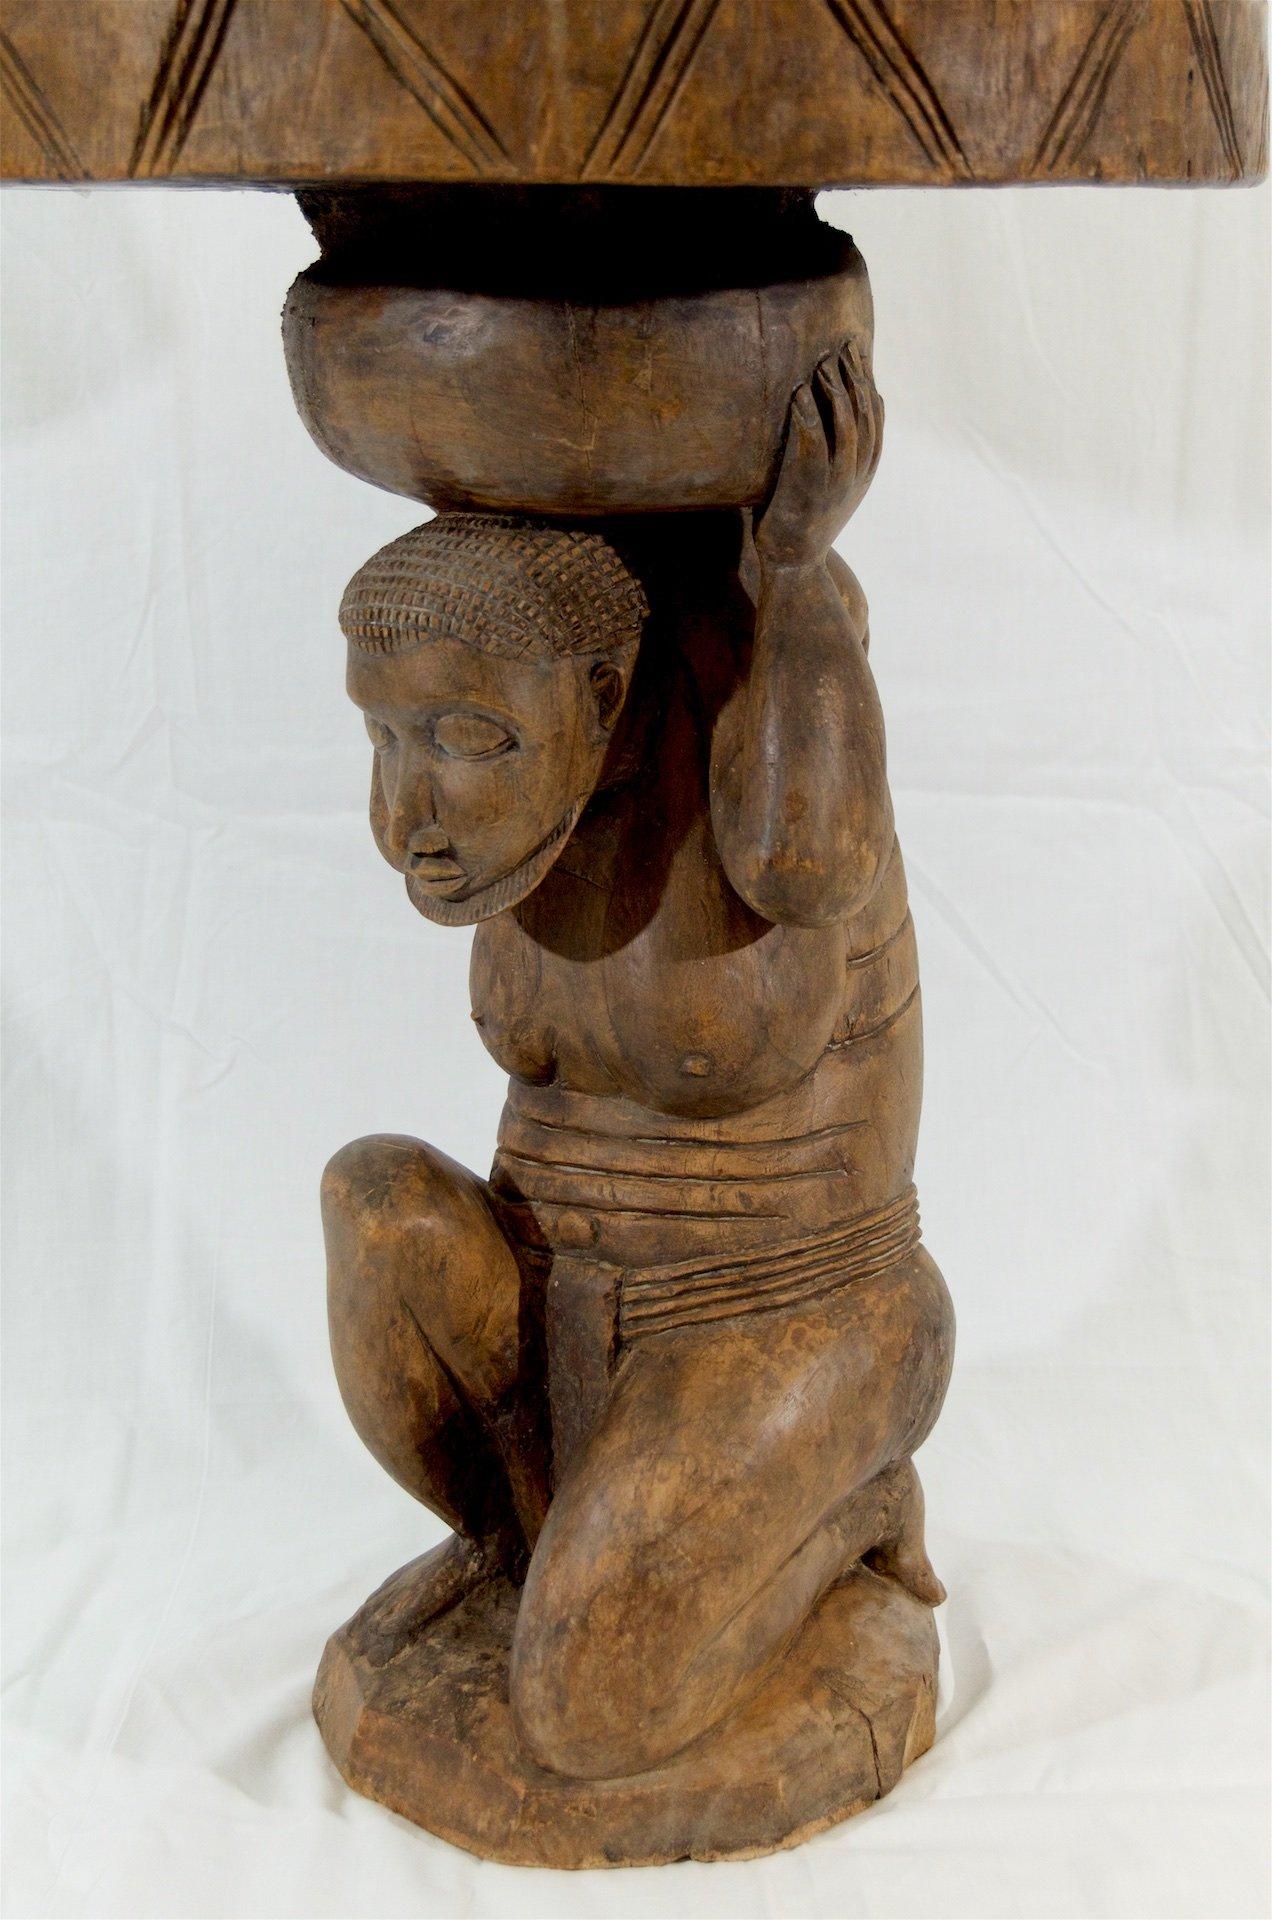 A unique side table carved of a crouching figure from a single piece of wood.